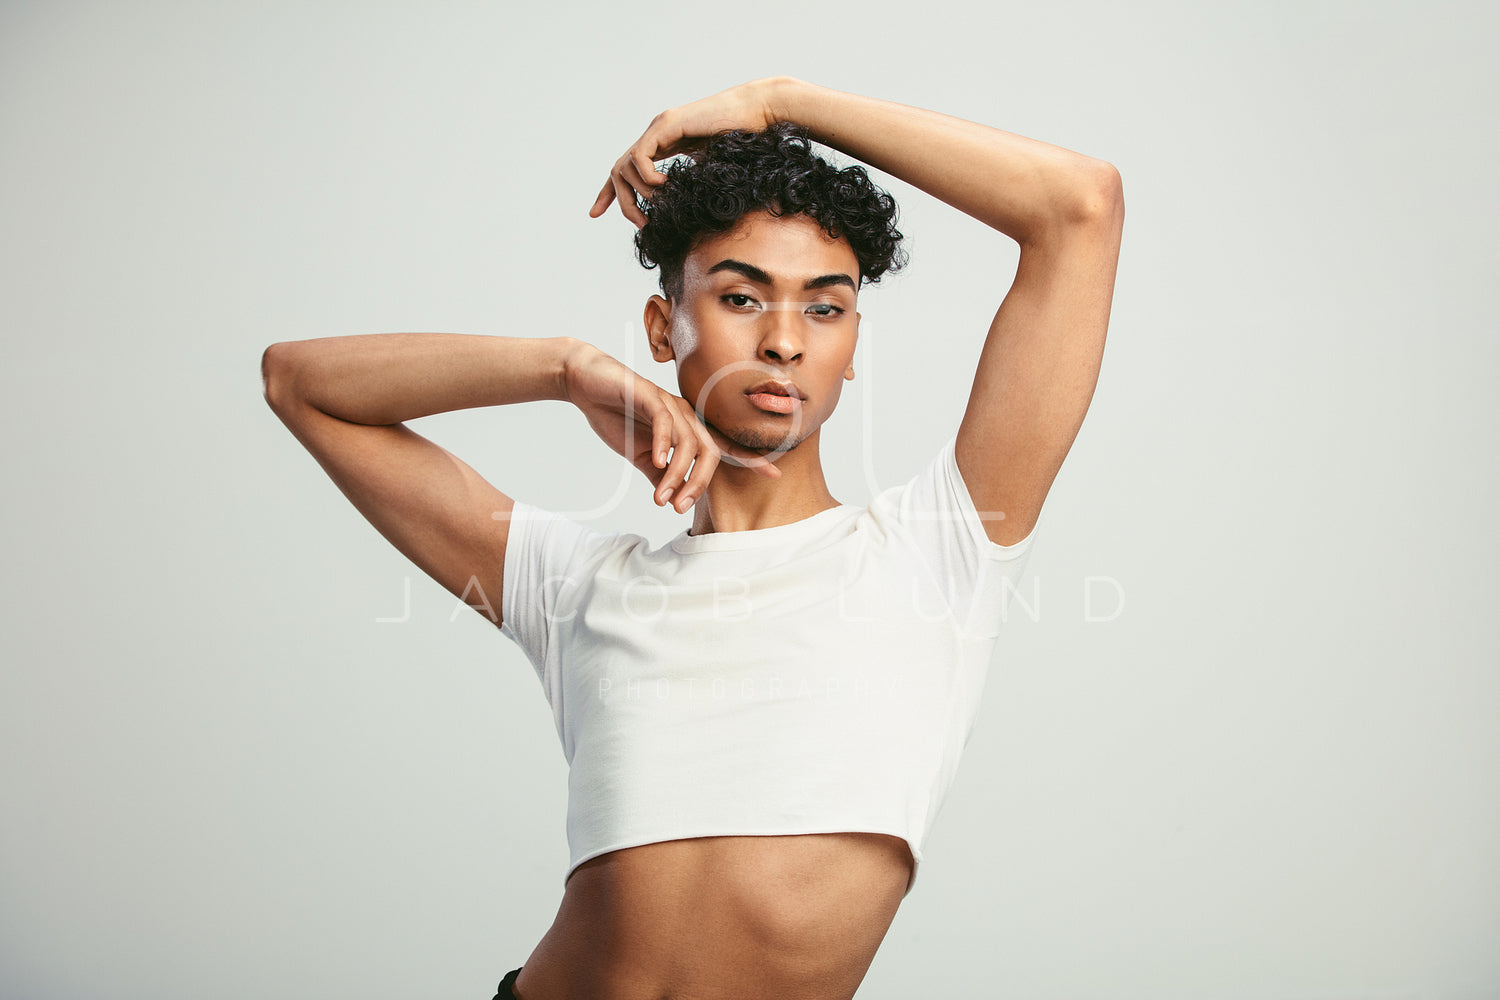 7 of the Best Poses for Male Models - FilterGrade